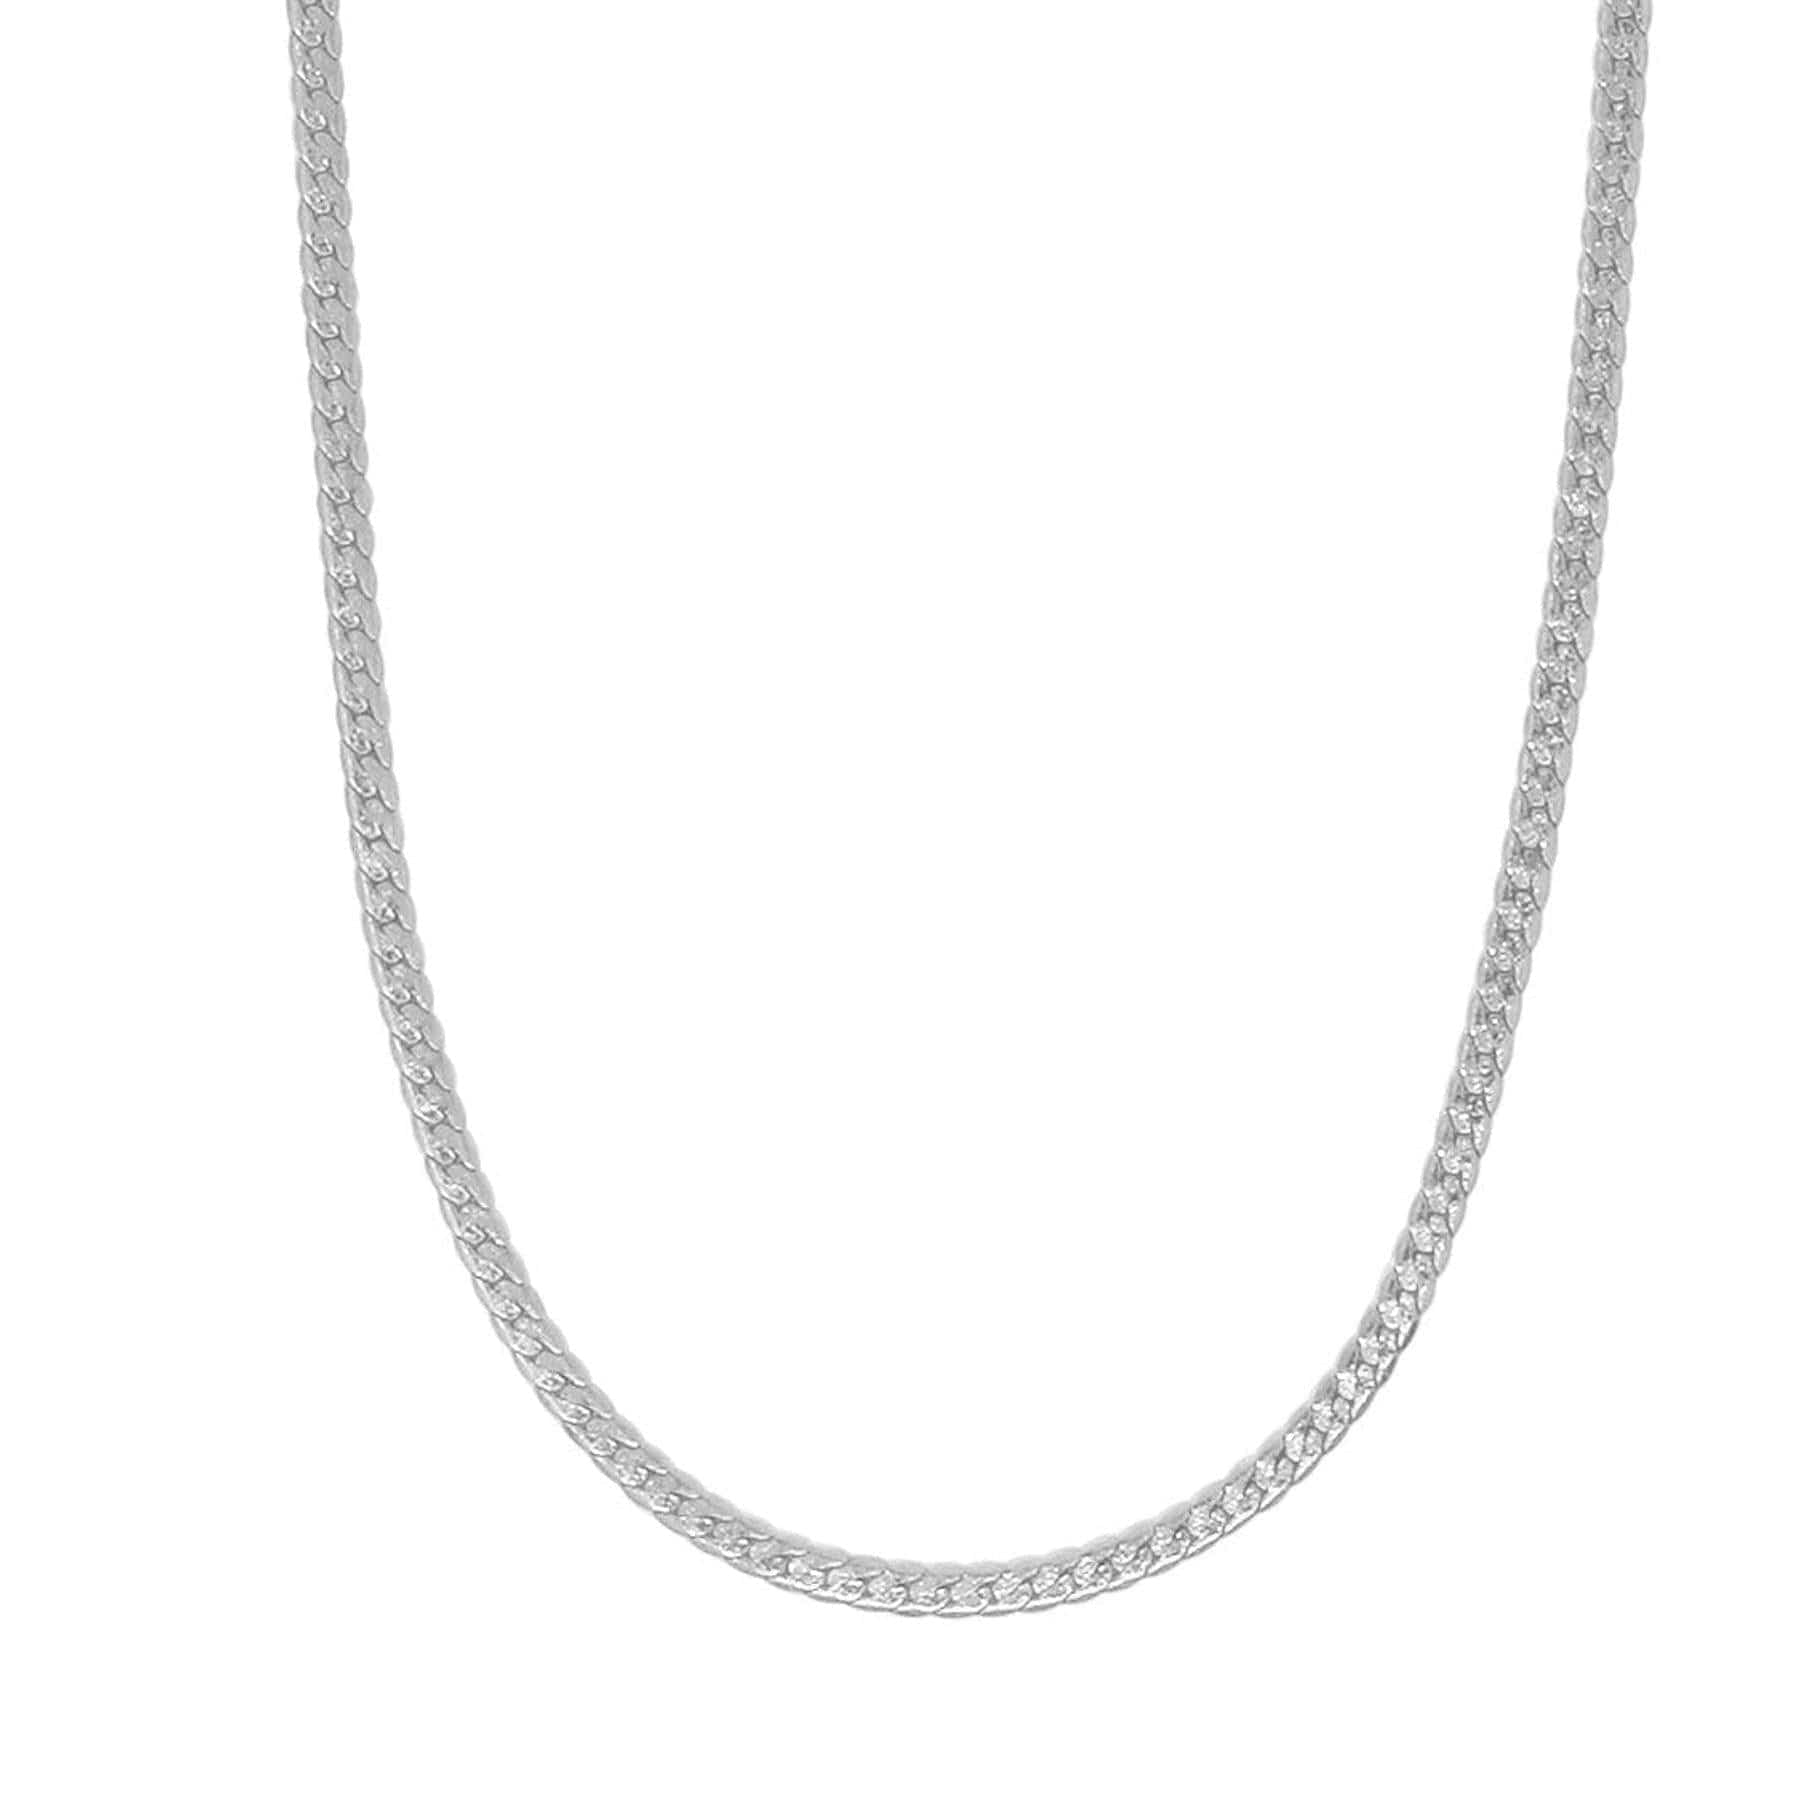 BohoMoon Stainless Steel Viper Necklace Silver / Choker